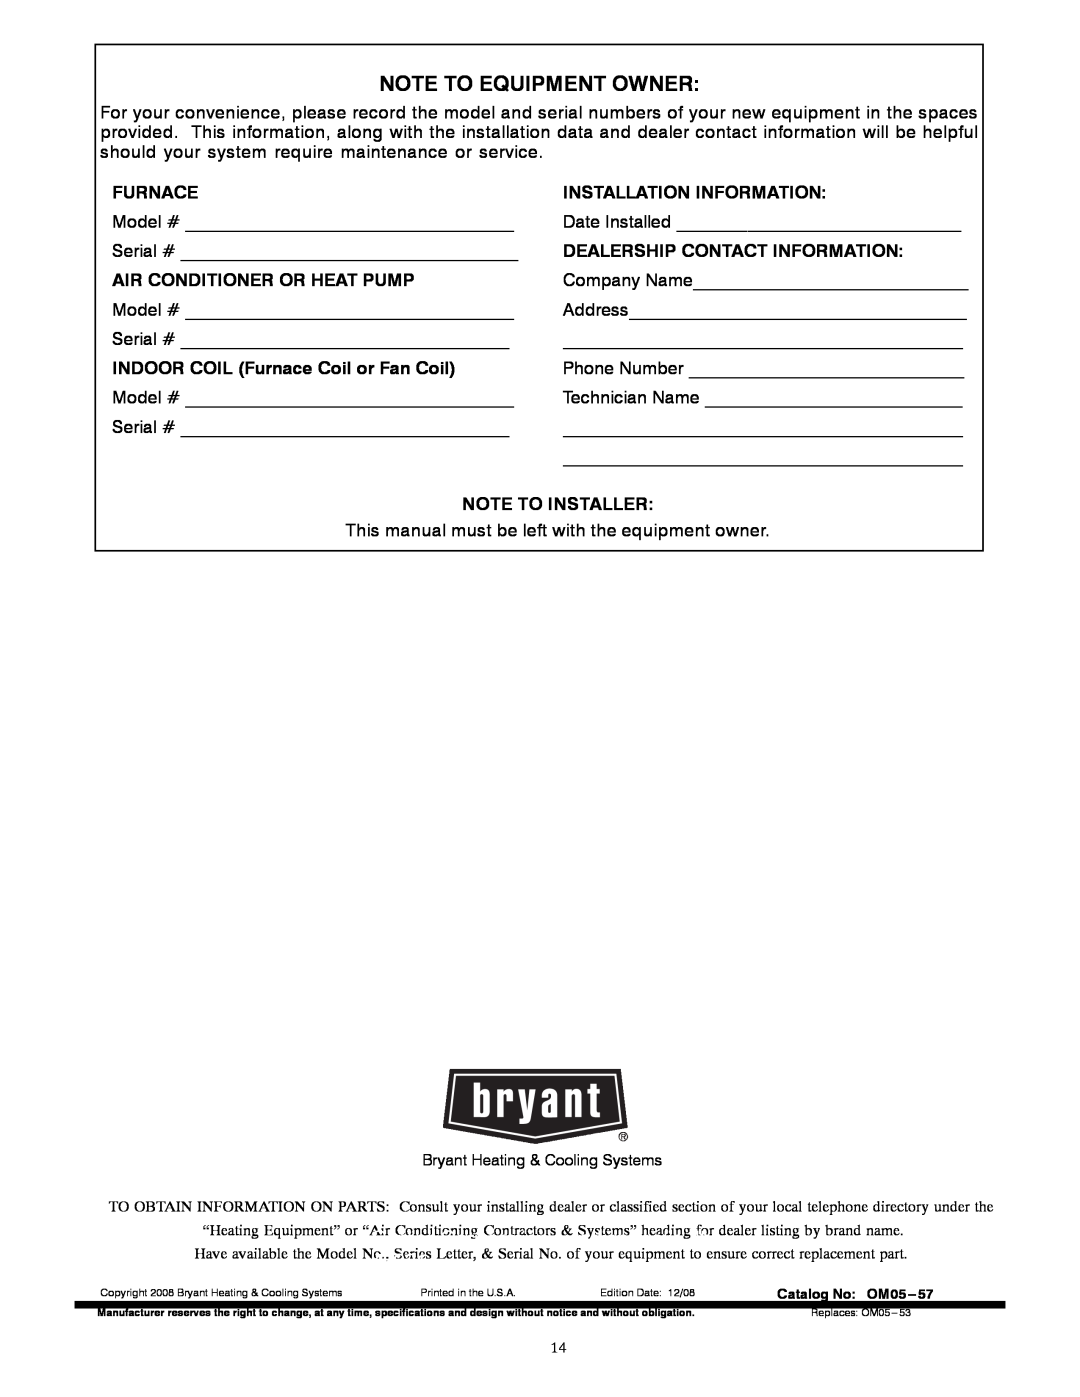 Bryant 355CAV owner manual Note To Equipment Owner, Furnace, Installation Information, Dealership Contact Information 